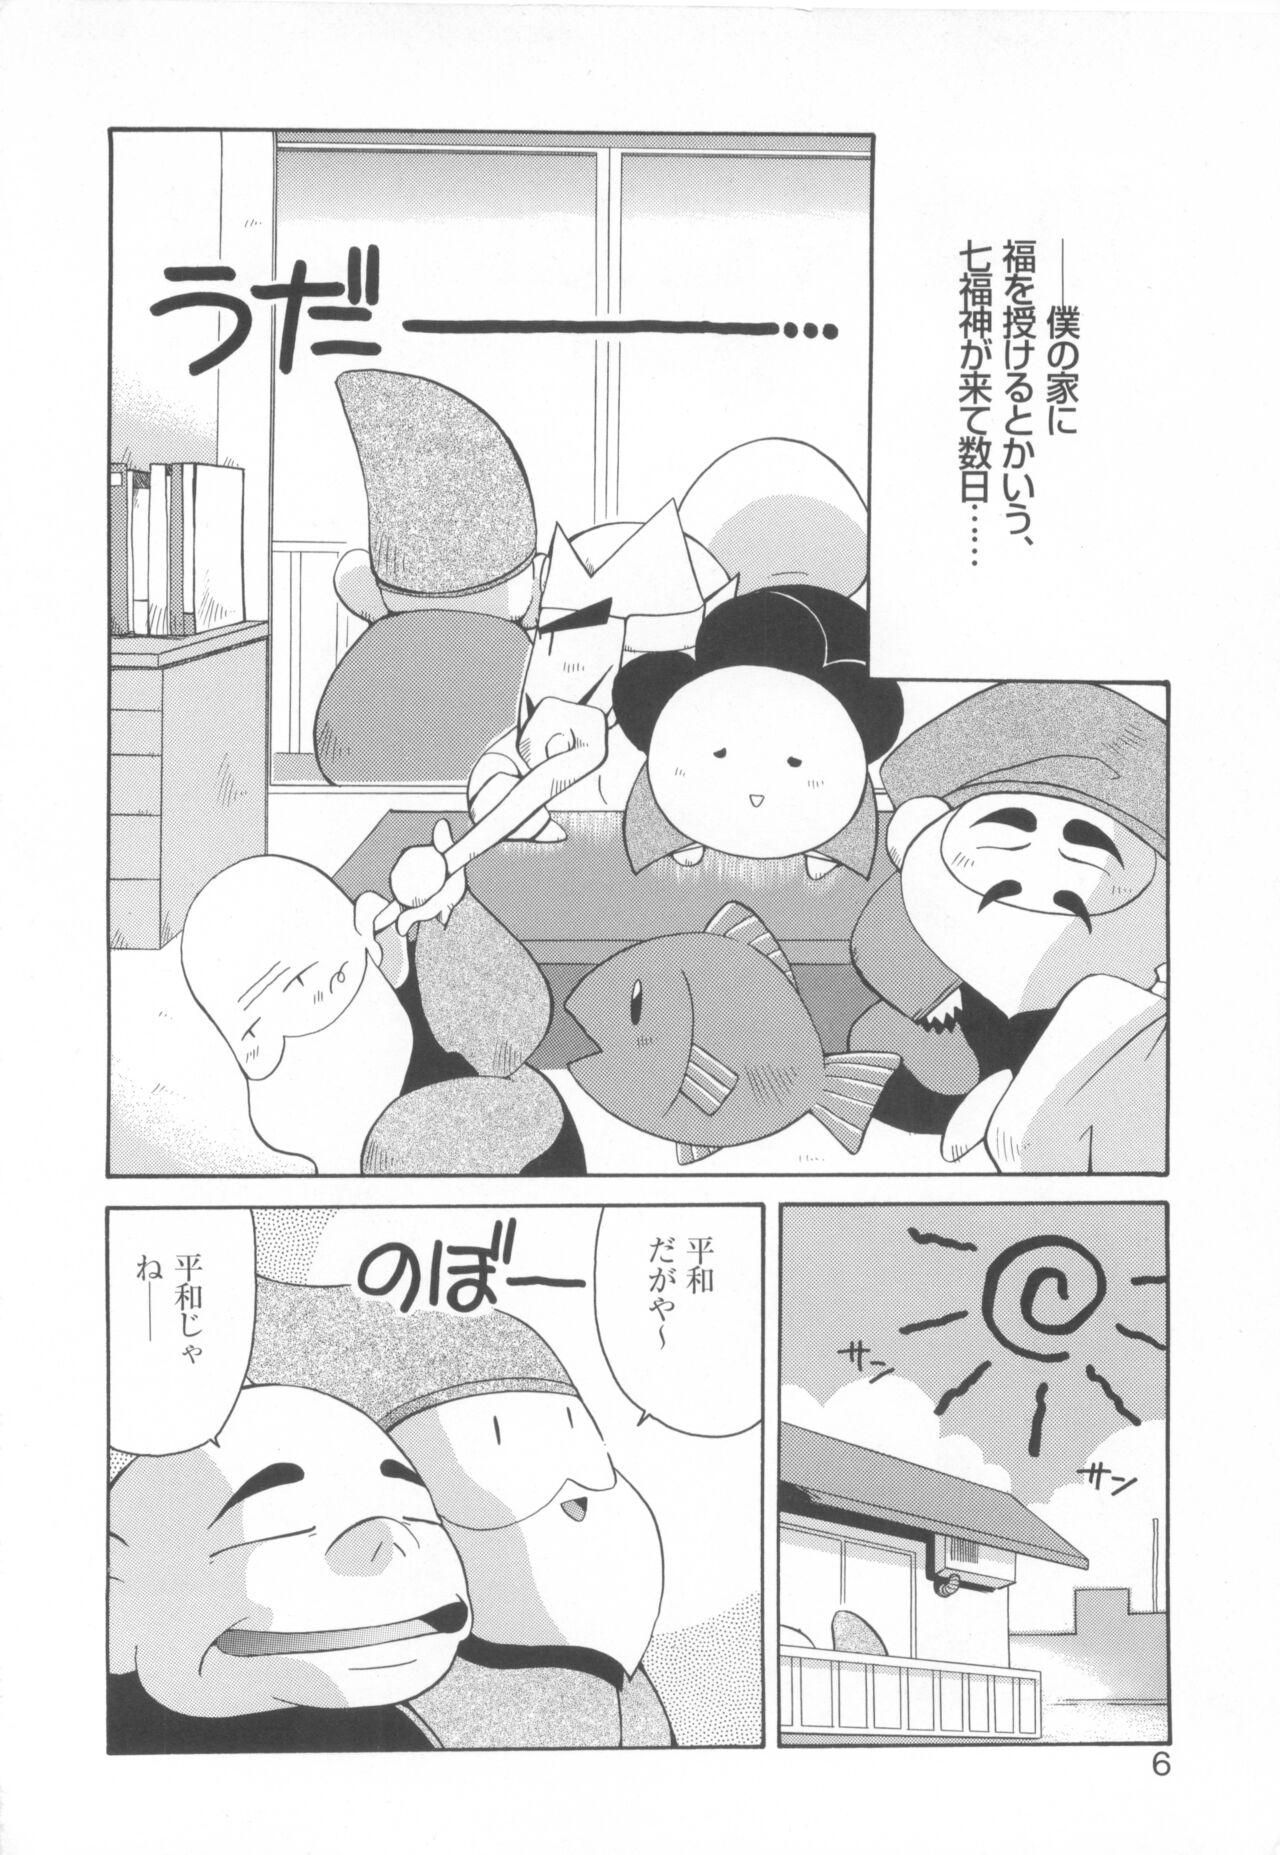 Anime Can Can Bunny Anthology Comic 2 - Can can bunny Amigo - Page 8